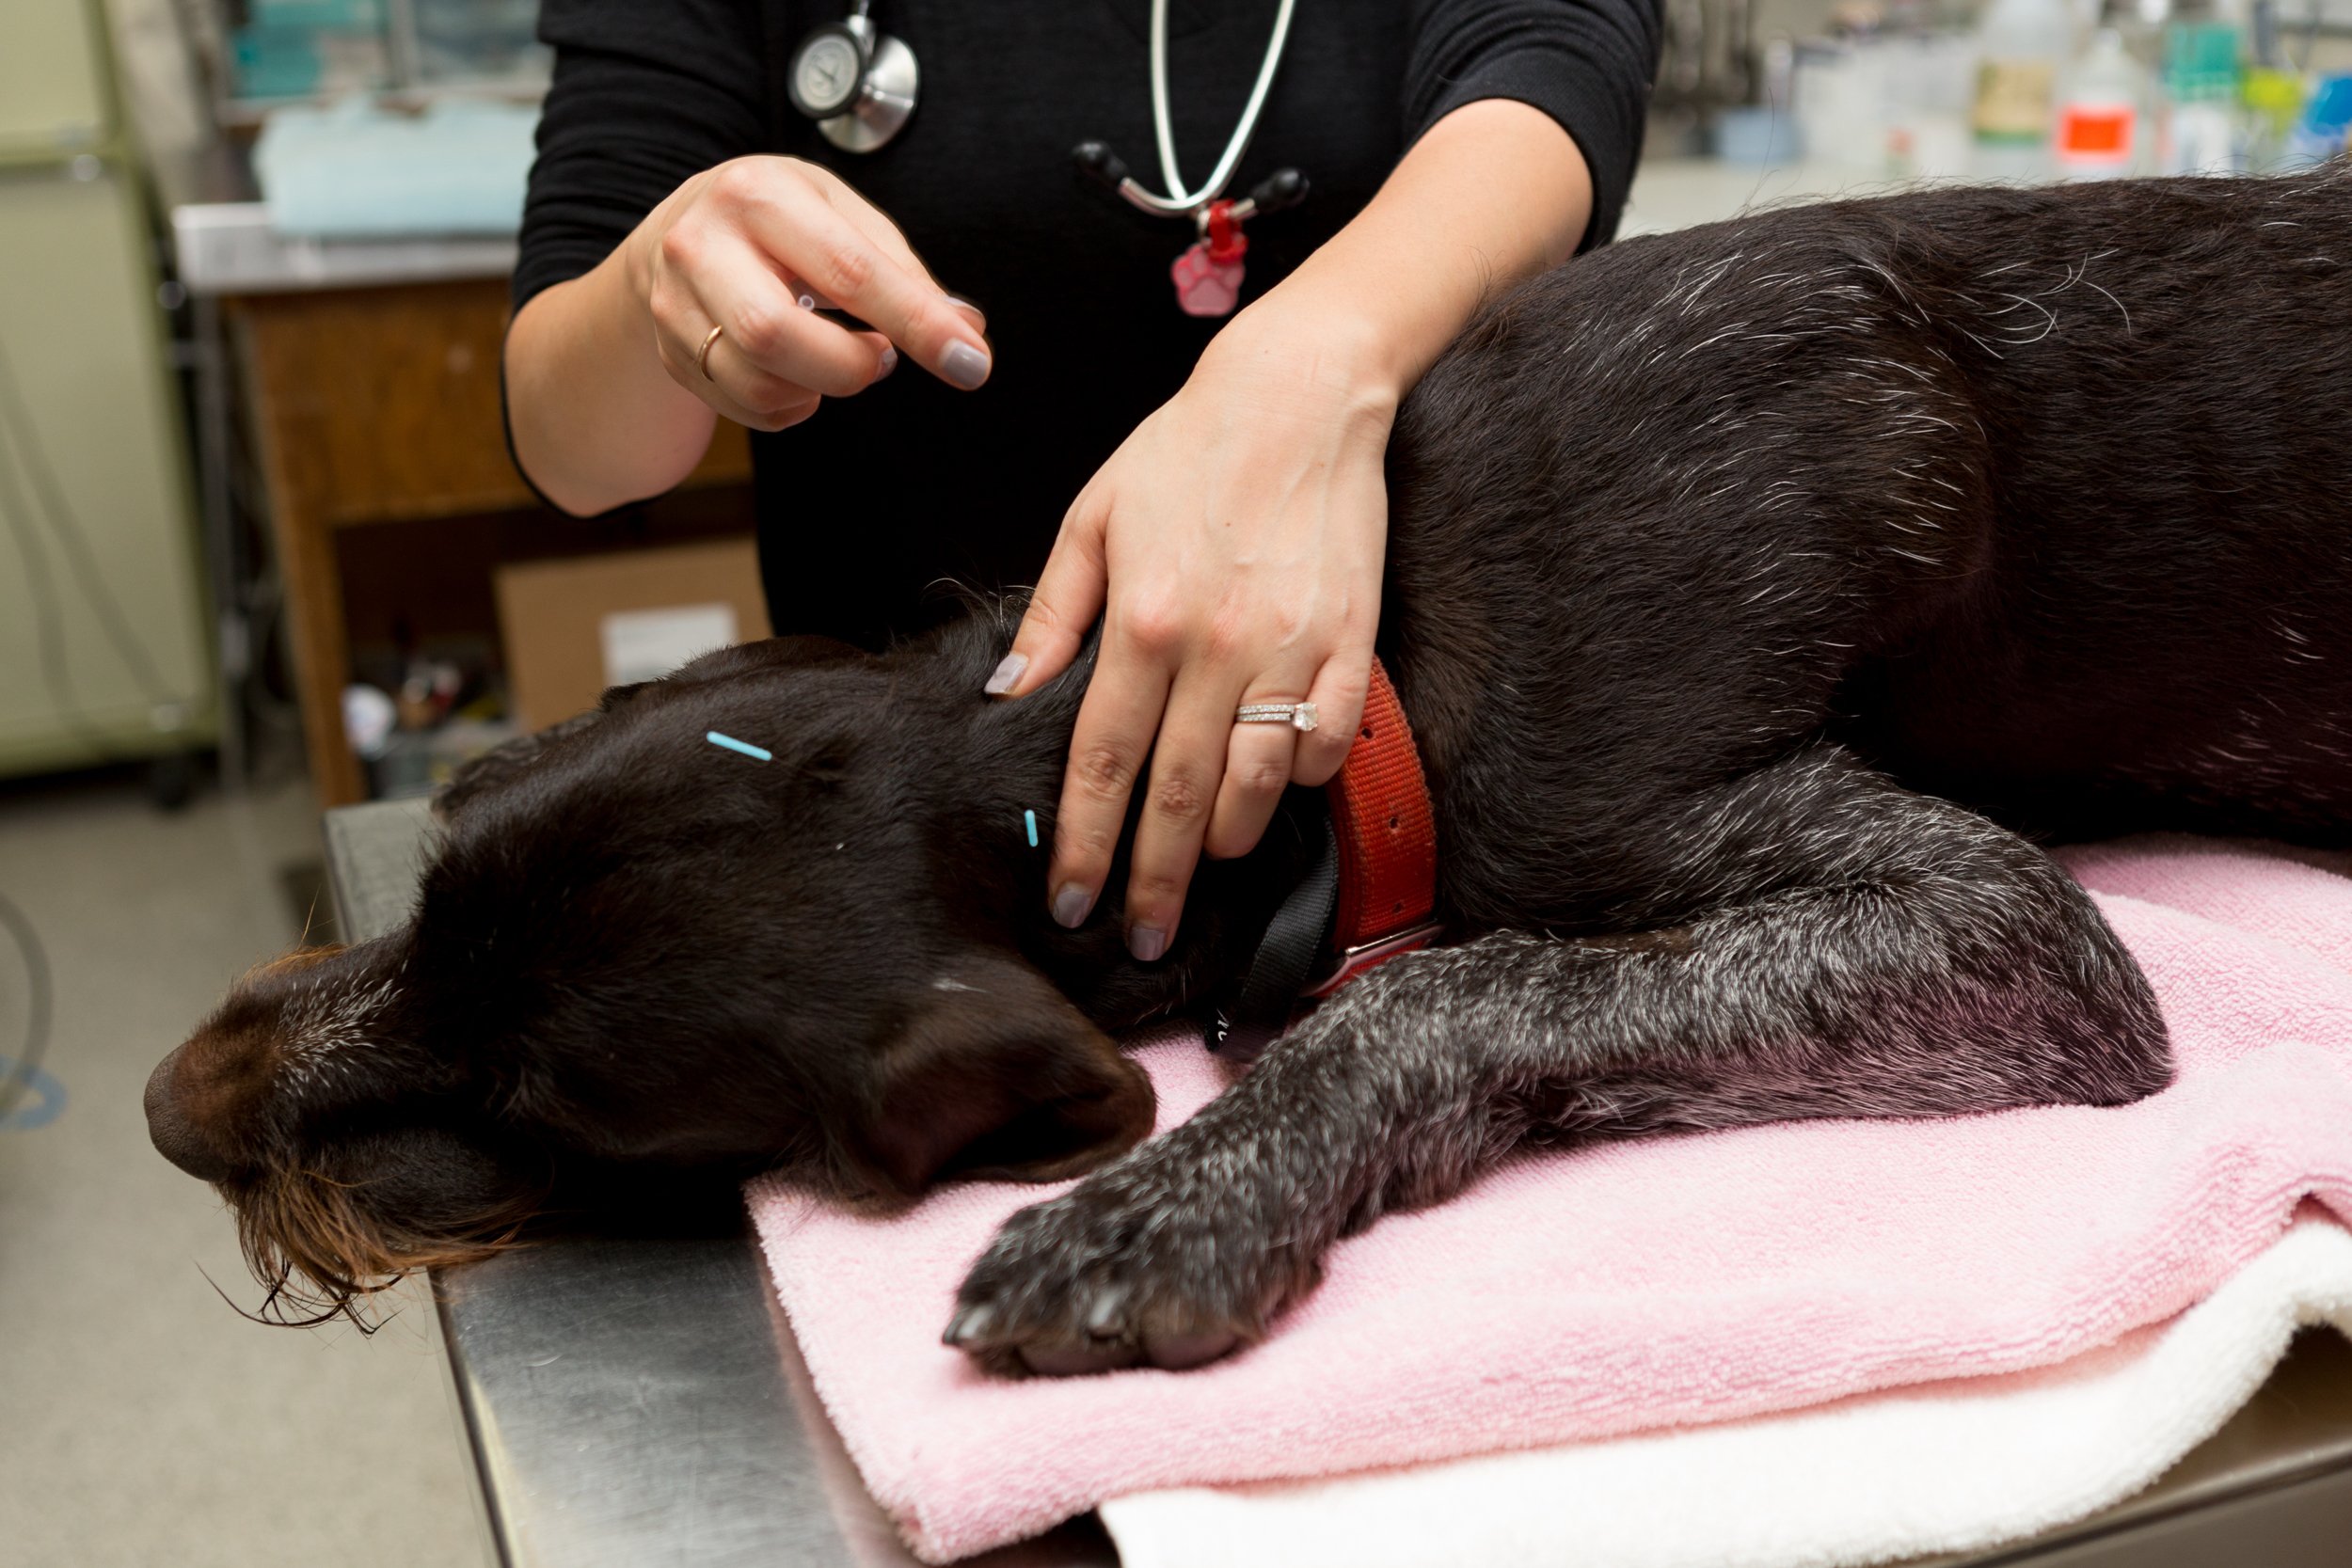 One of the vets performing acupuncture